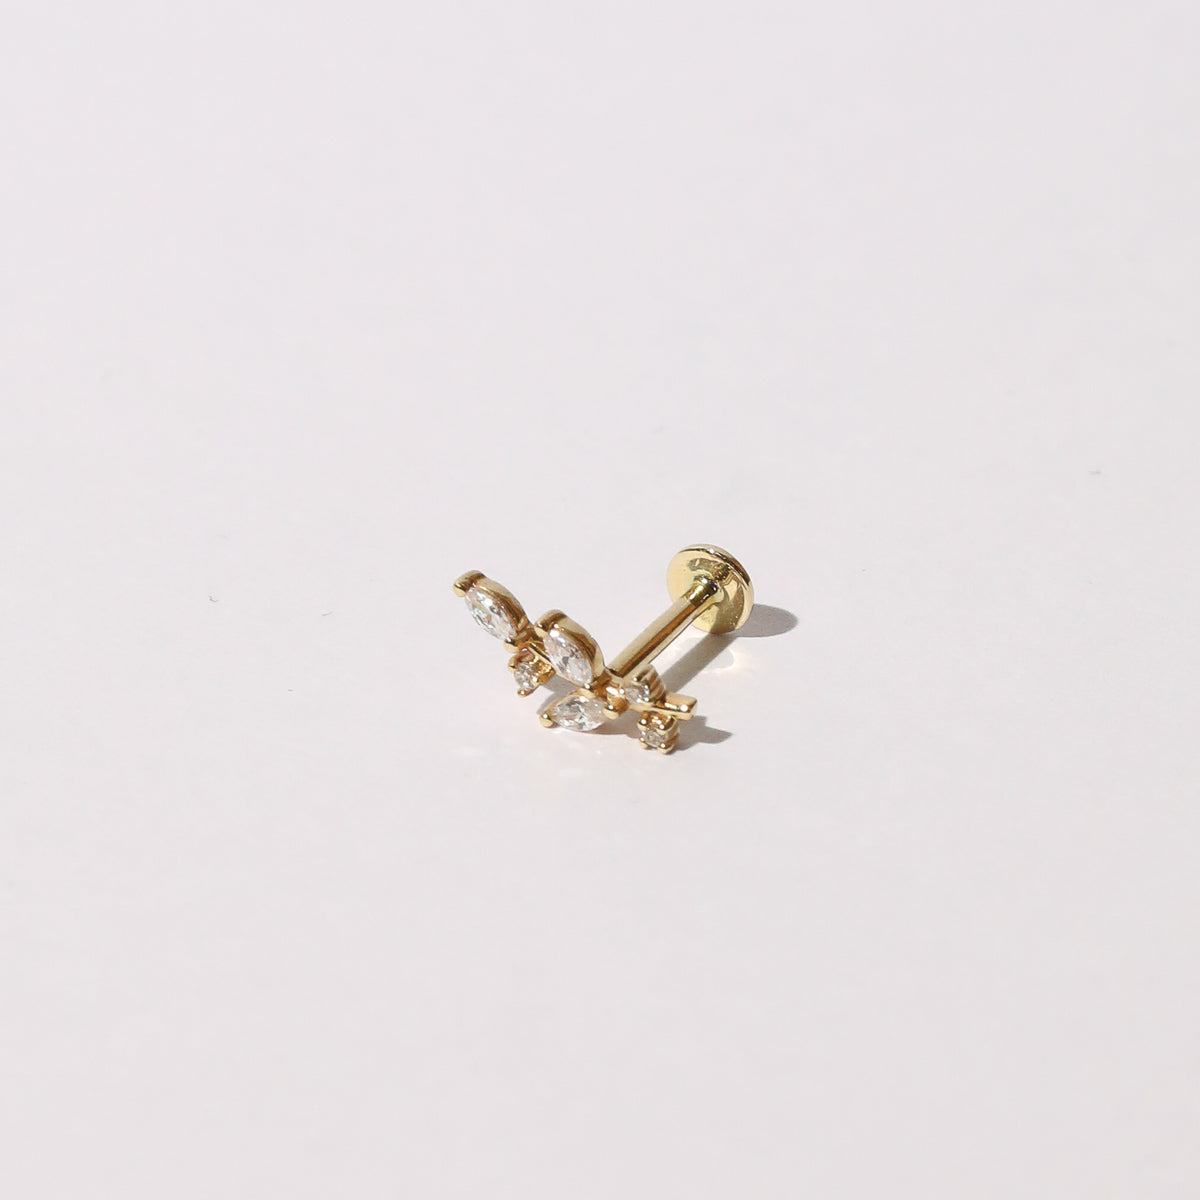 Botanical Piercing Stud 6mm in Solid Gold flat lay